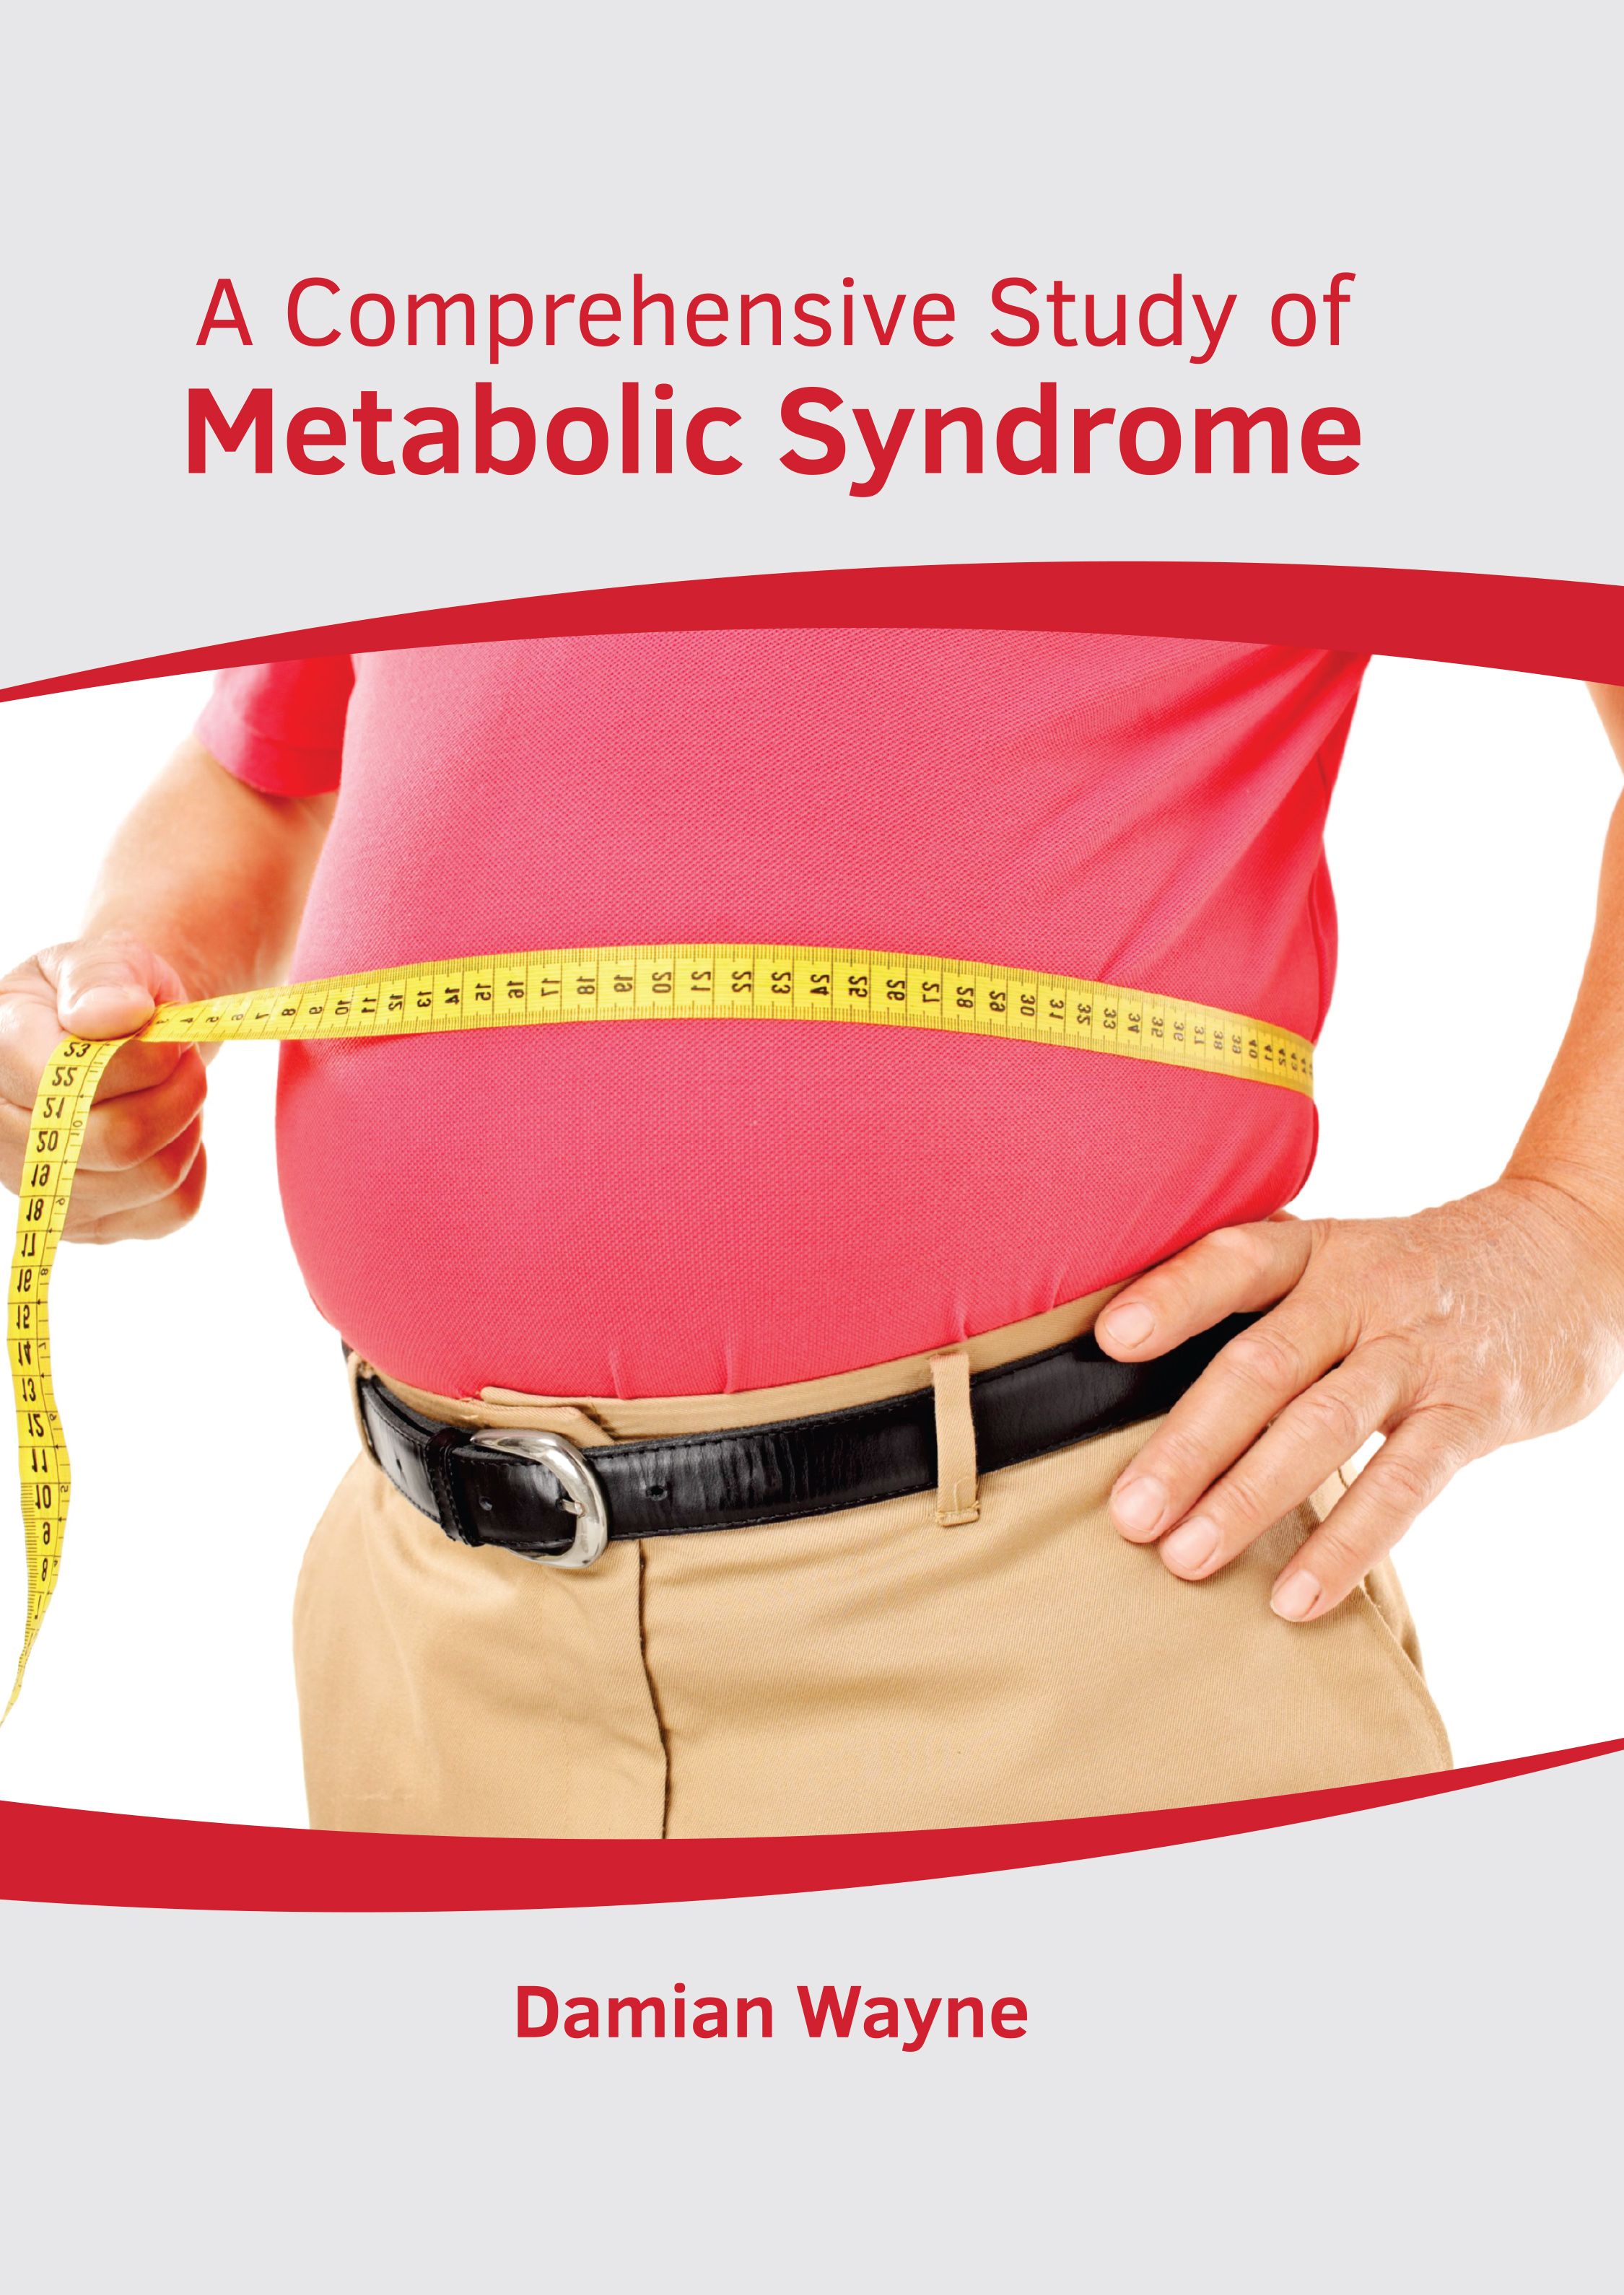 A COMPREHENSIVE STUDY OF METABOLIC SYNDROME